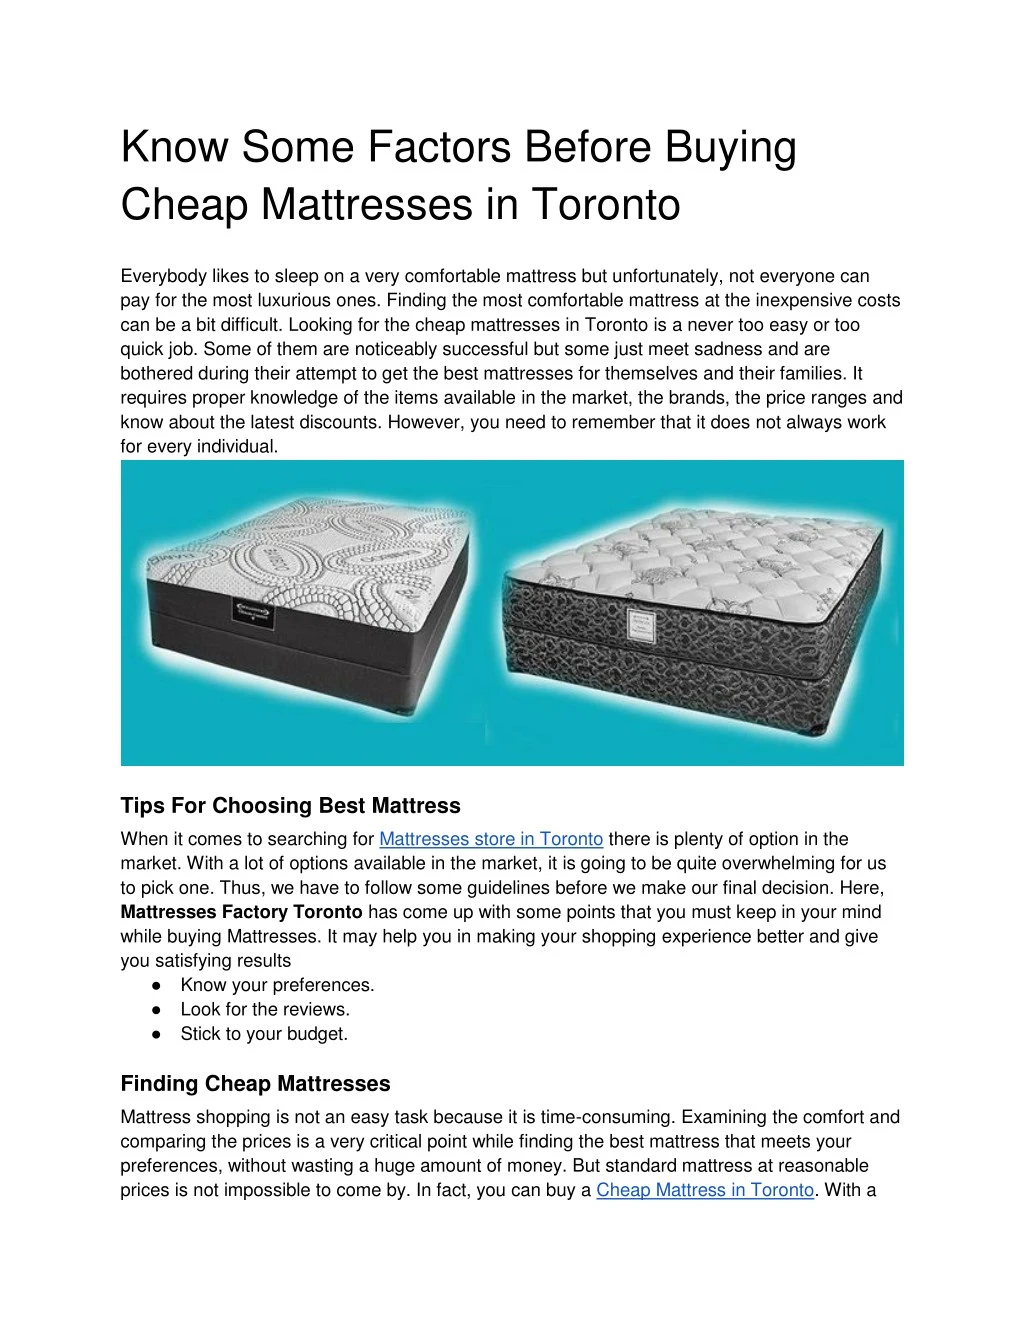 know some factors before buying cheap mattresses